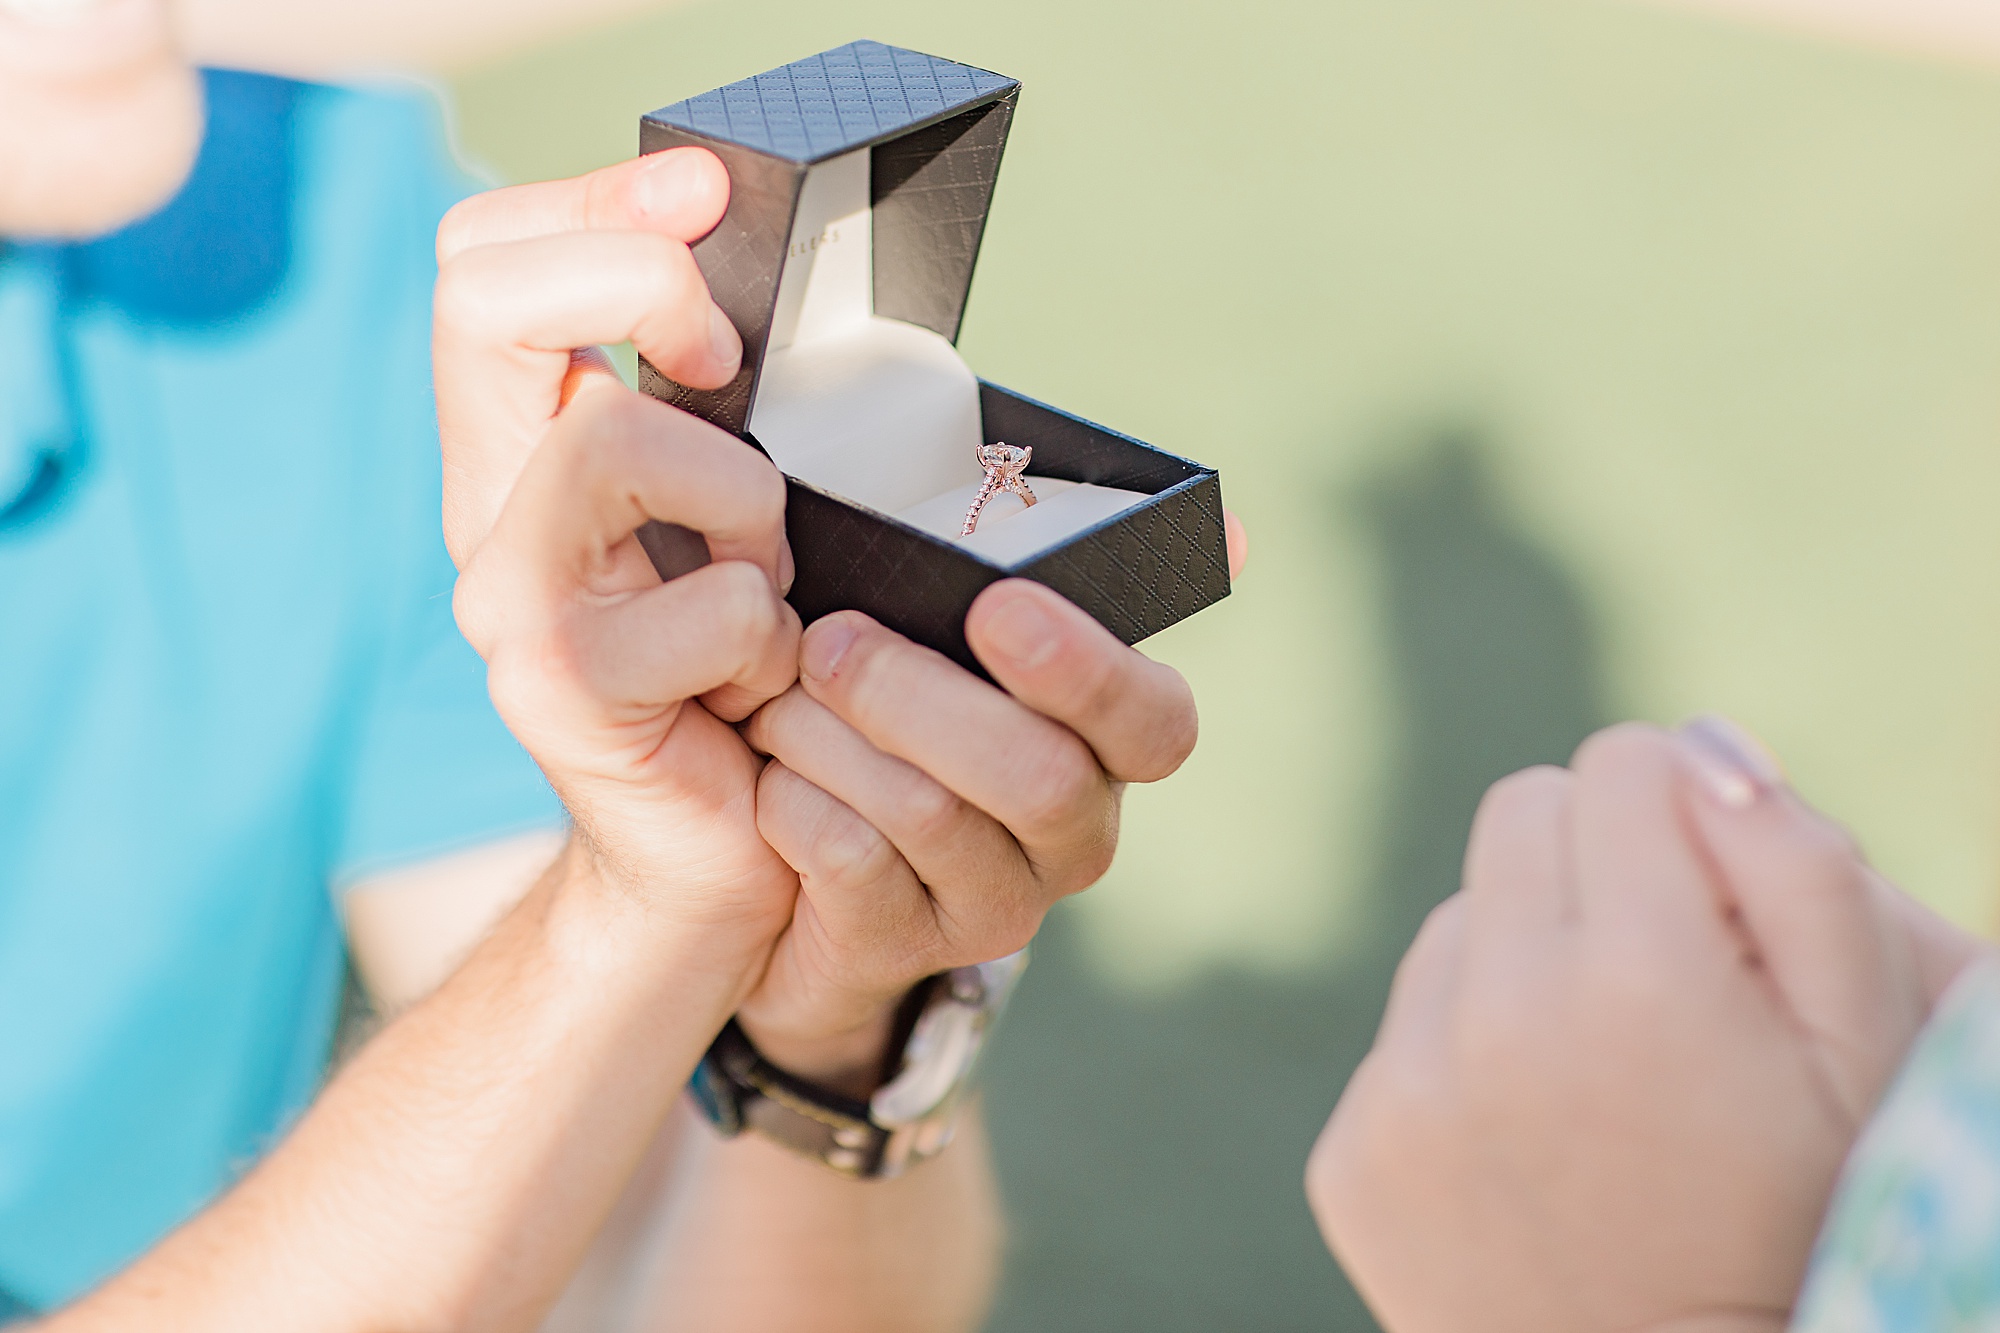 groom shows bride engagement ring after proposal 